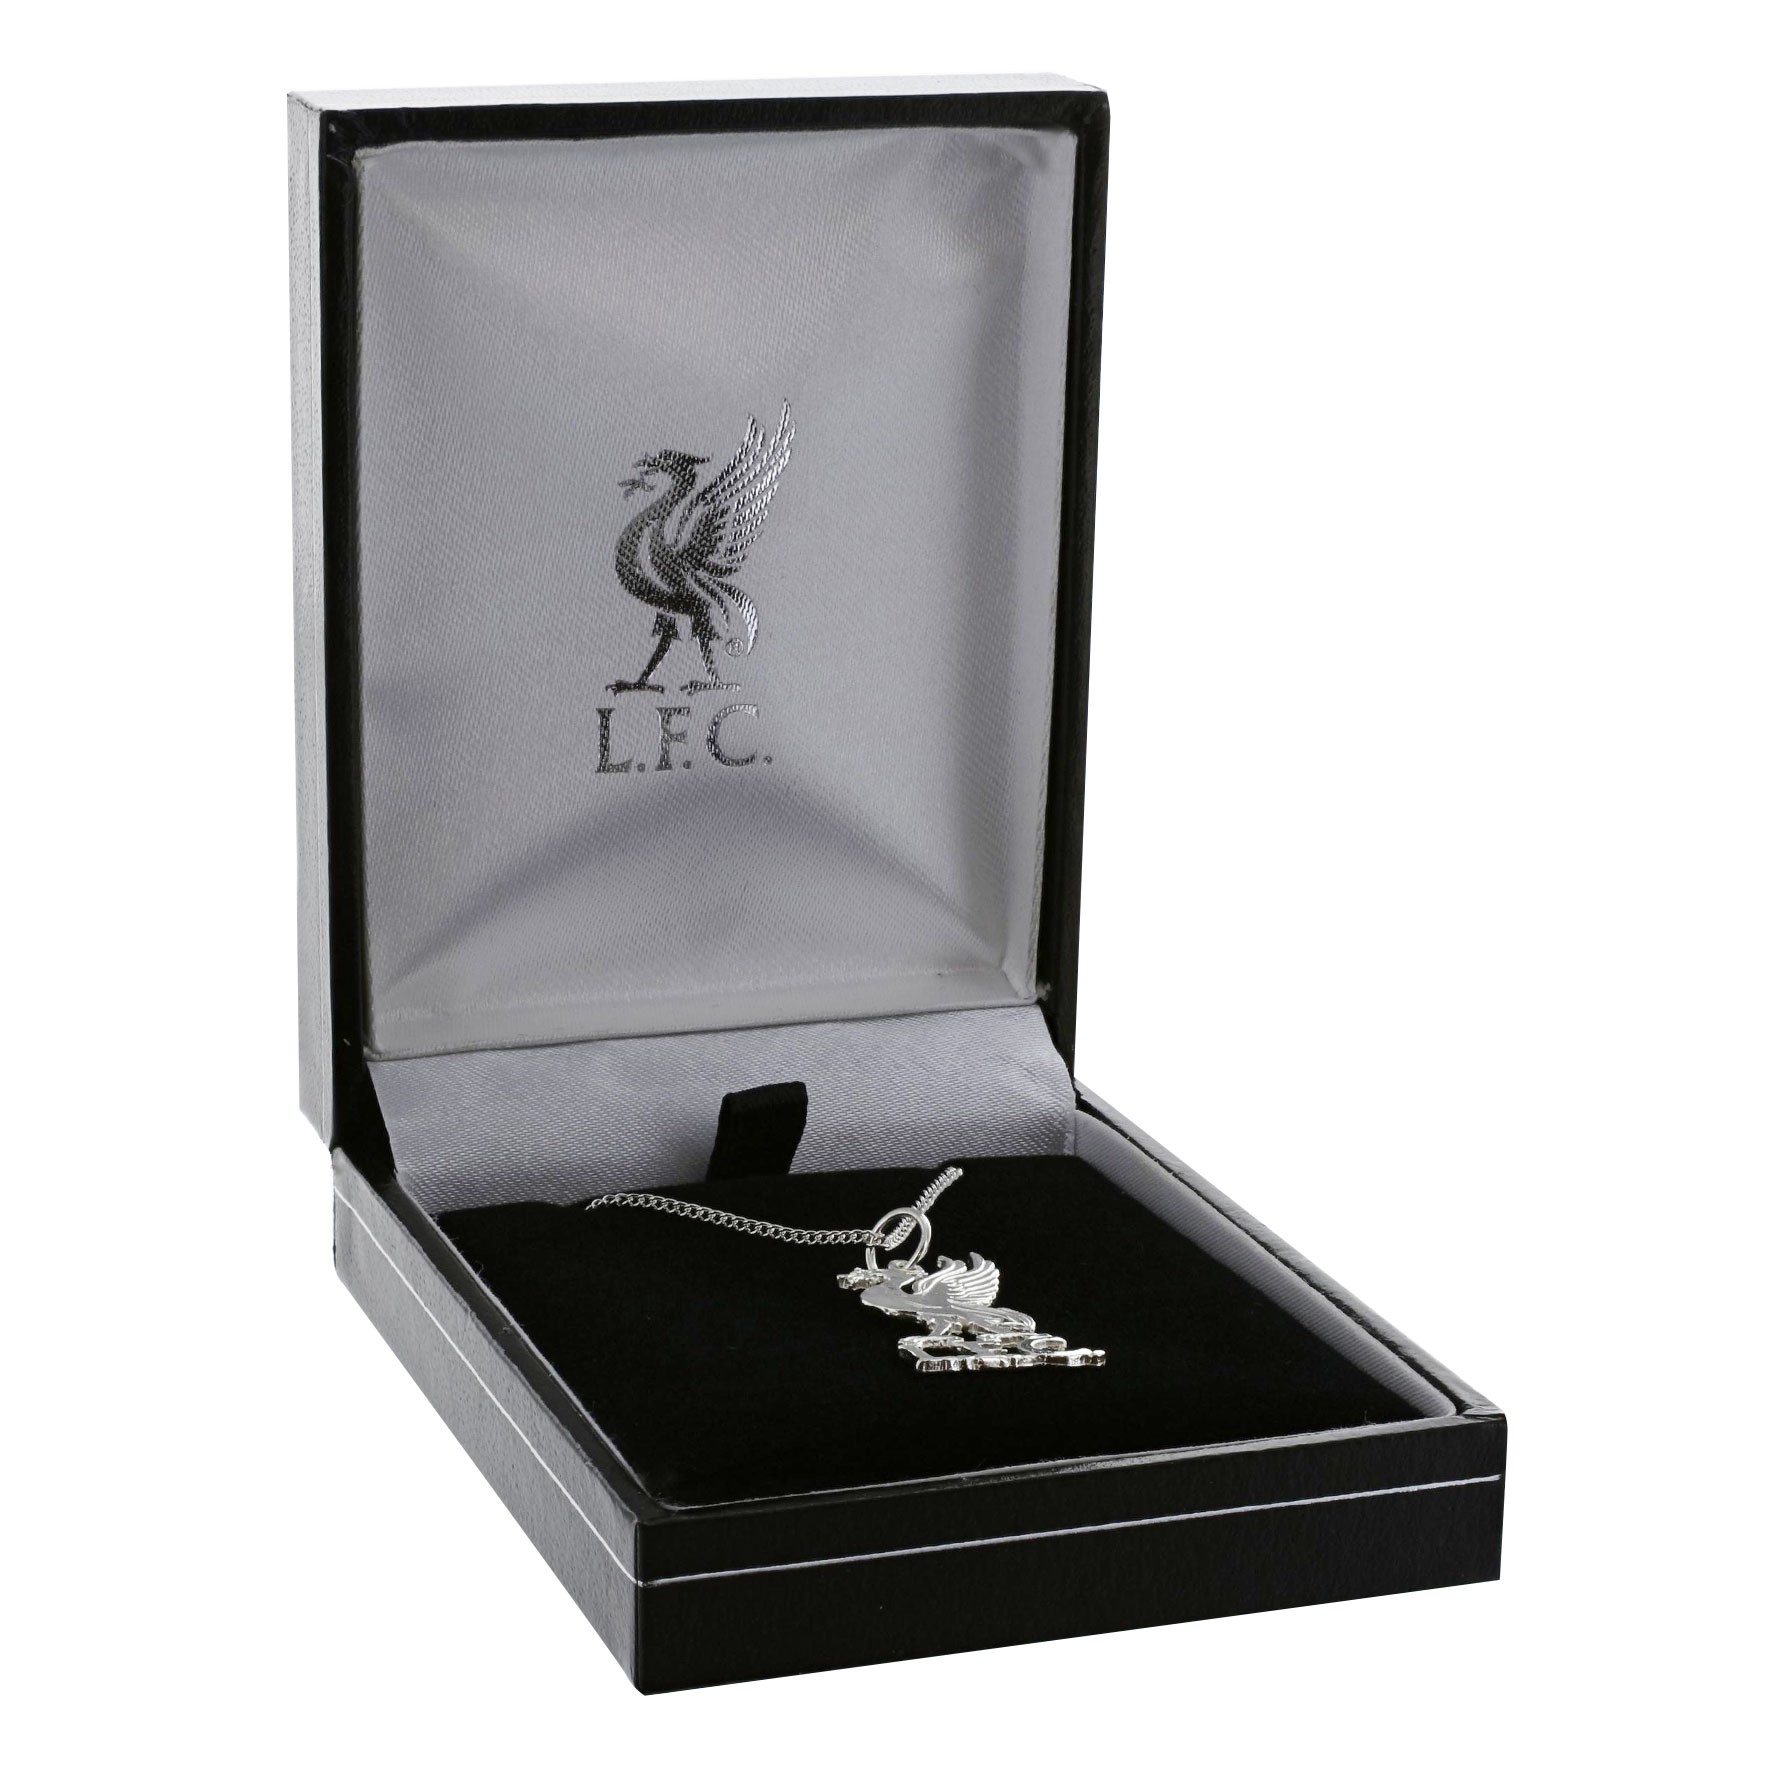 LFC Sterling Silver Liverbird Pendant and Chain